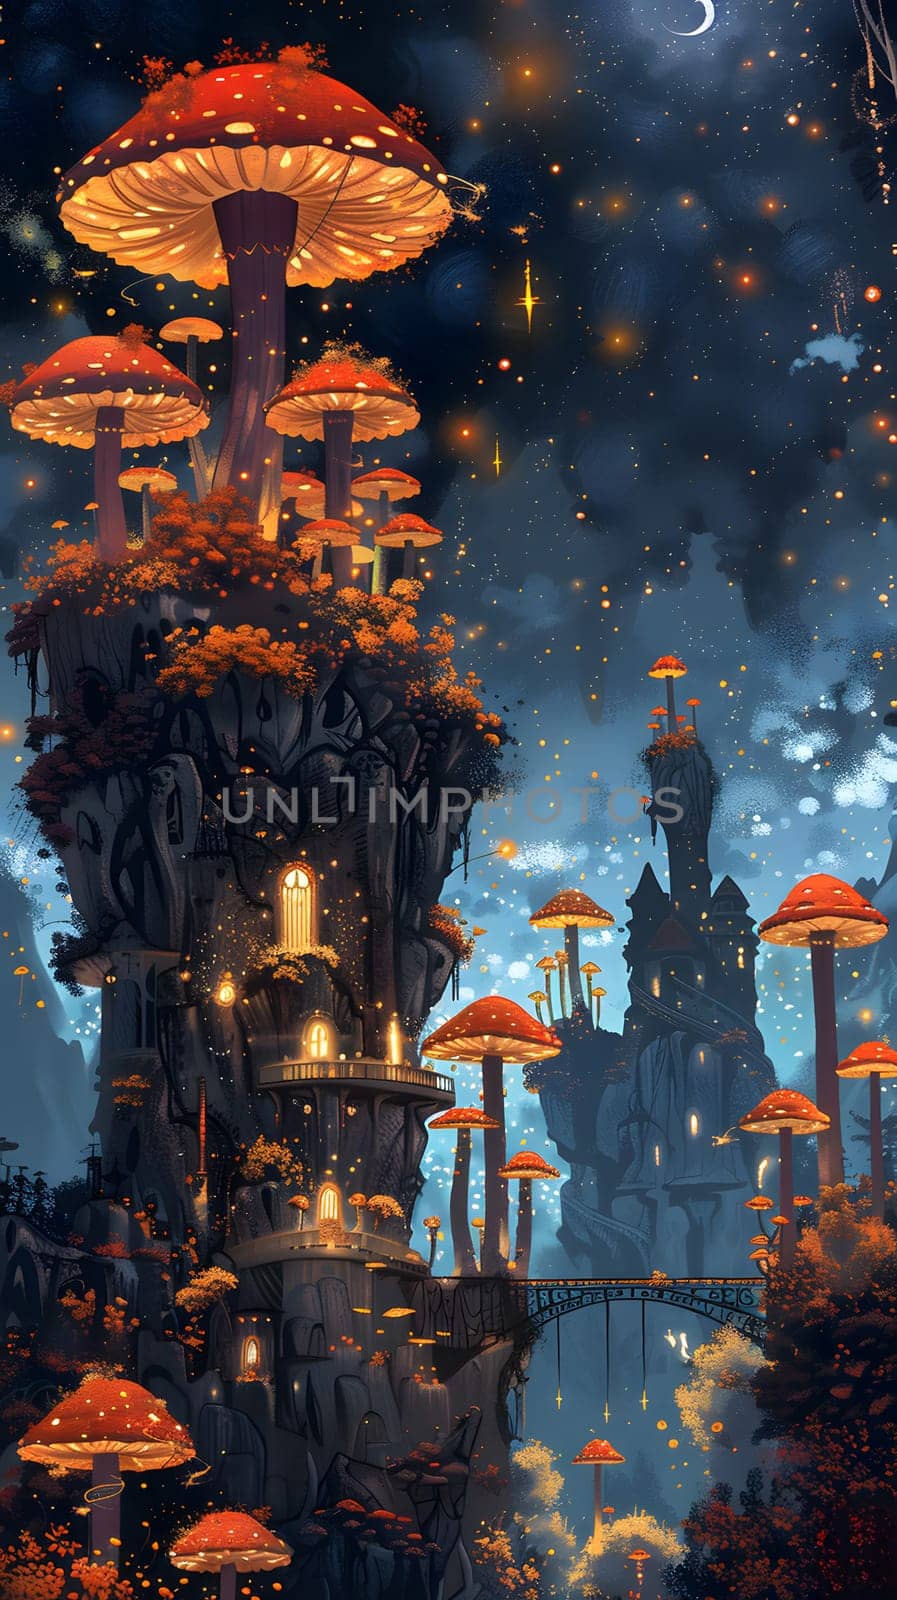 a painting of a castle surrounded by mushrooms High quality